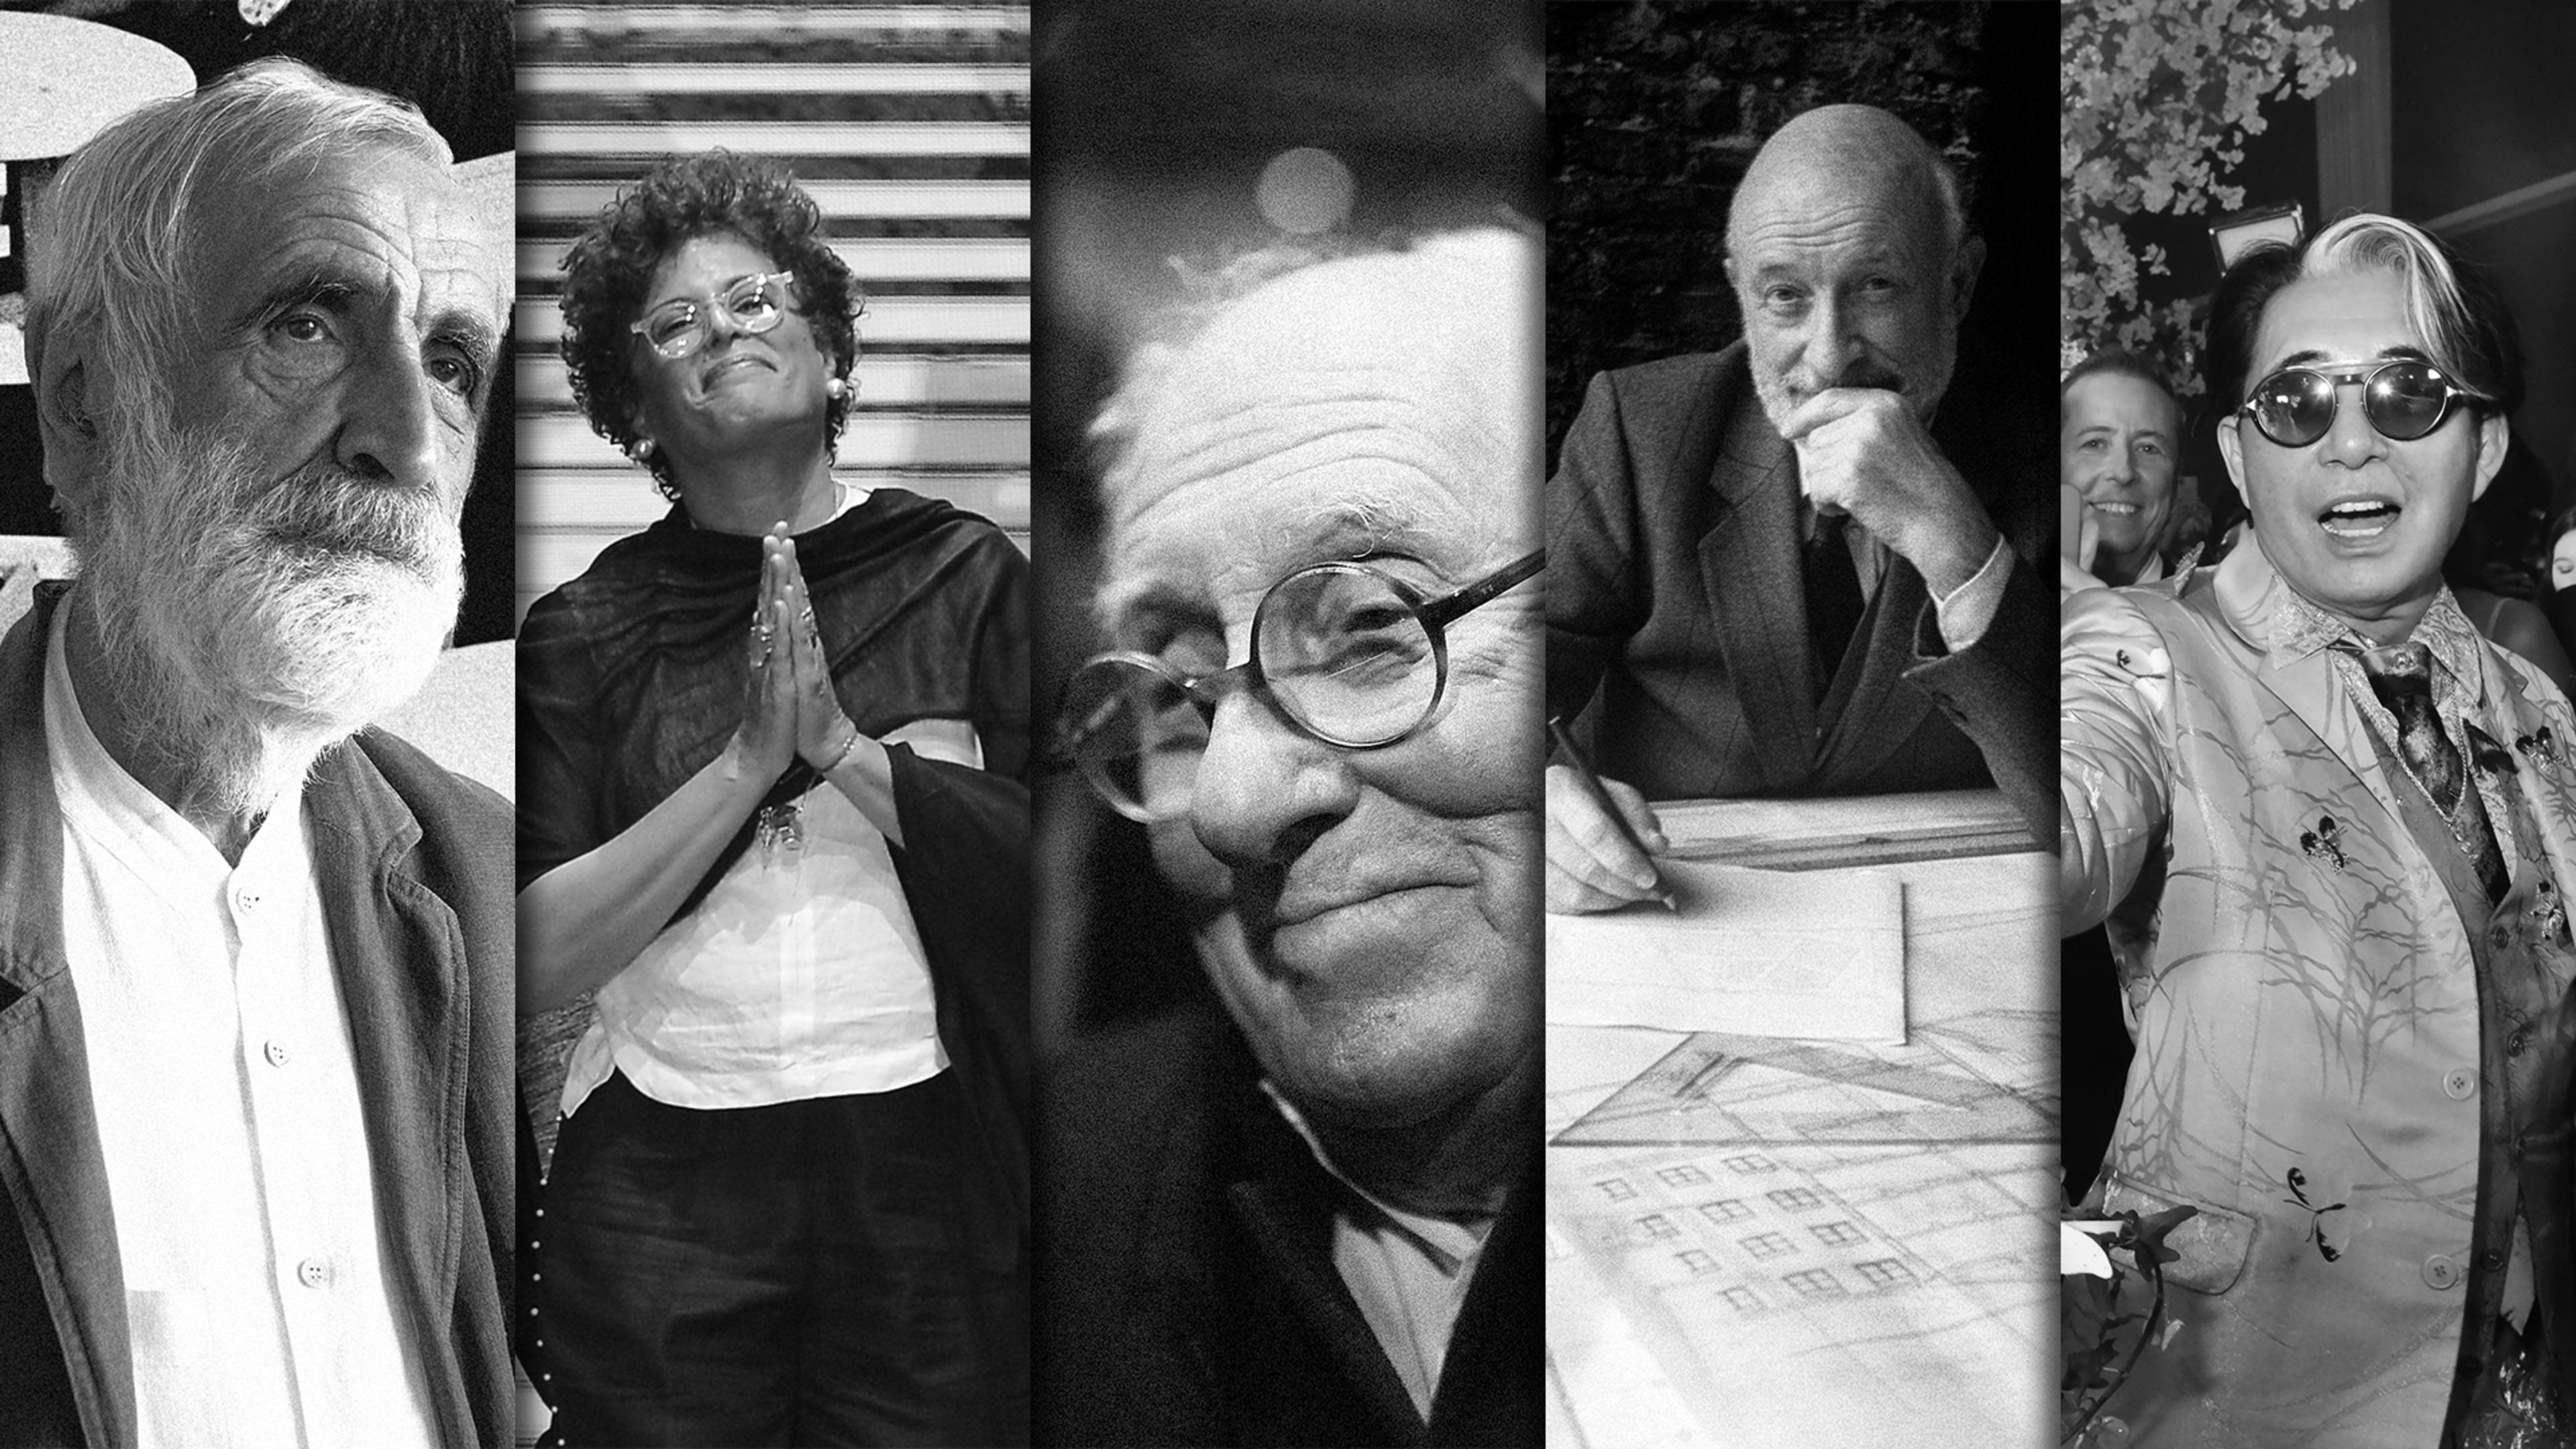 Remembering the designers, architects, and creative thinkers who died of COVID-19